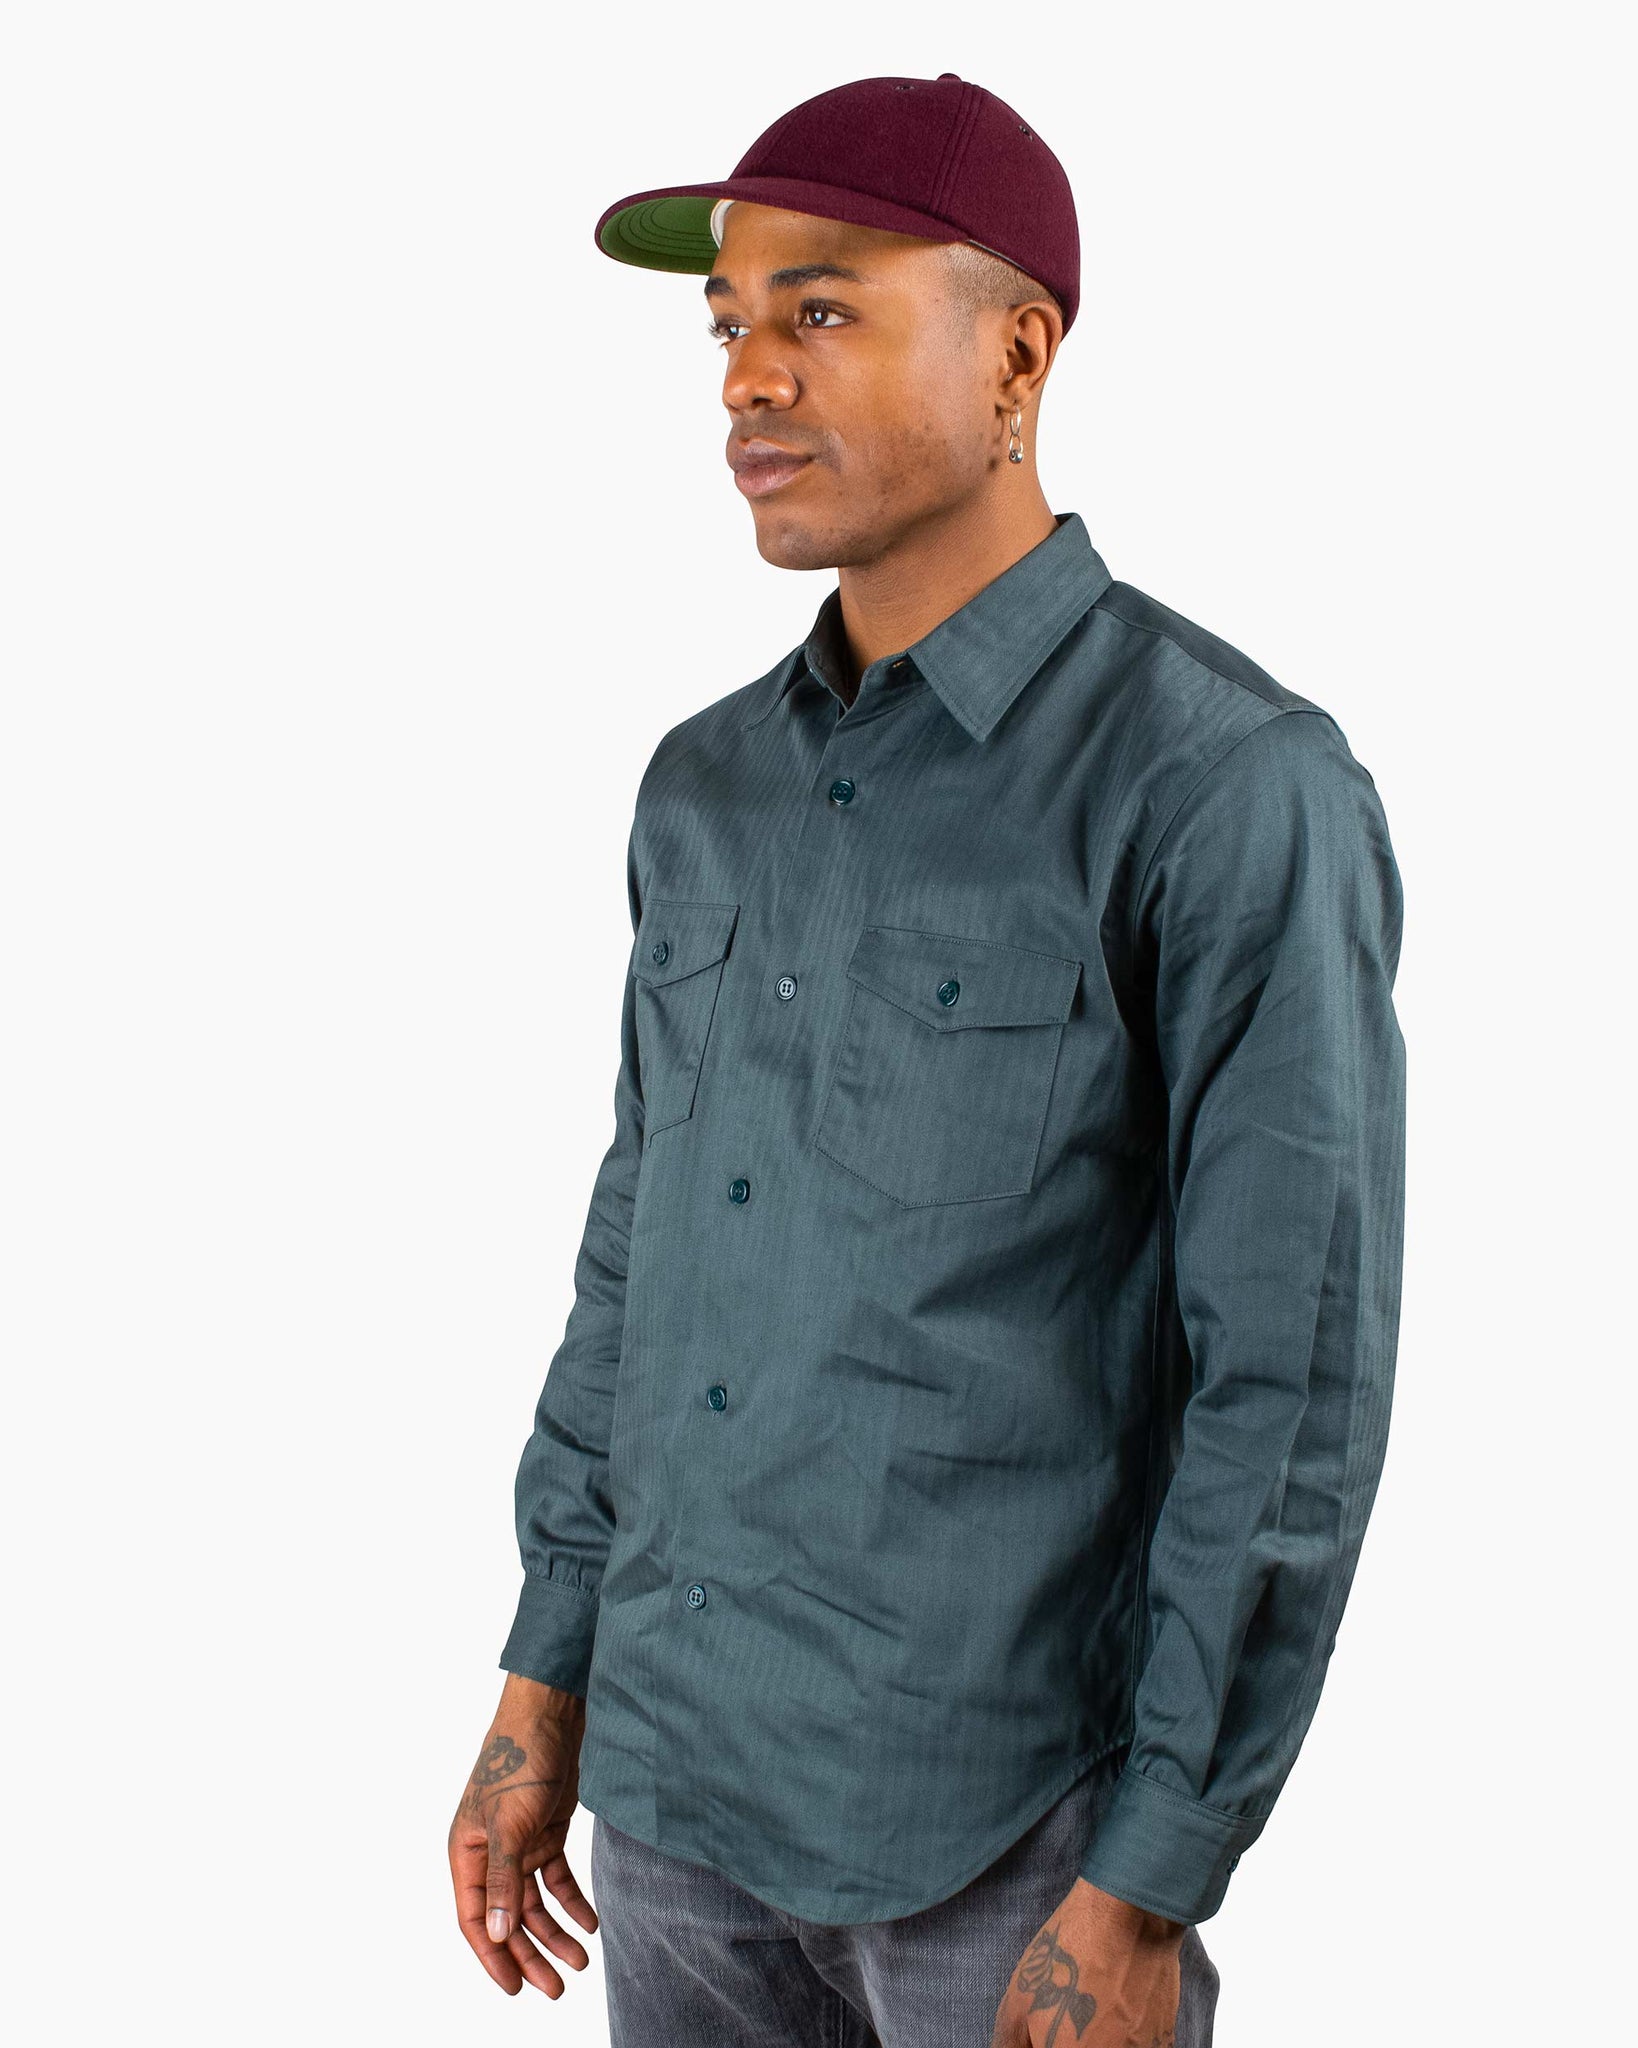 The Real McCoy's MS20010 8HU HBT Workshirt L/S Forest